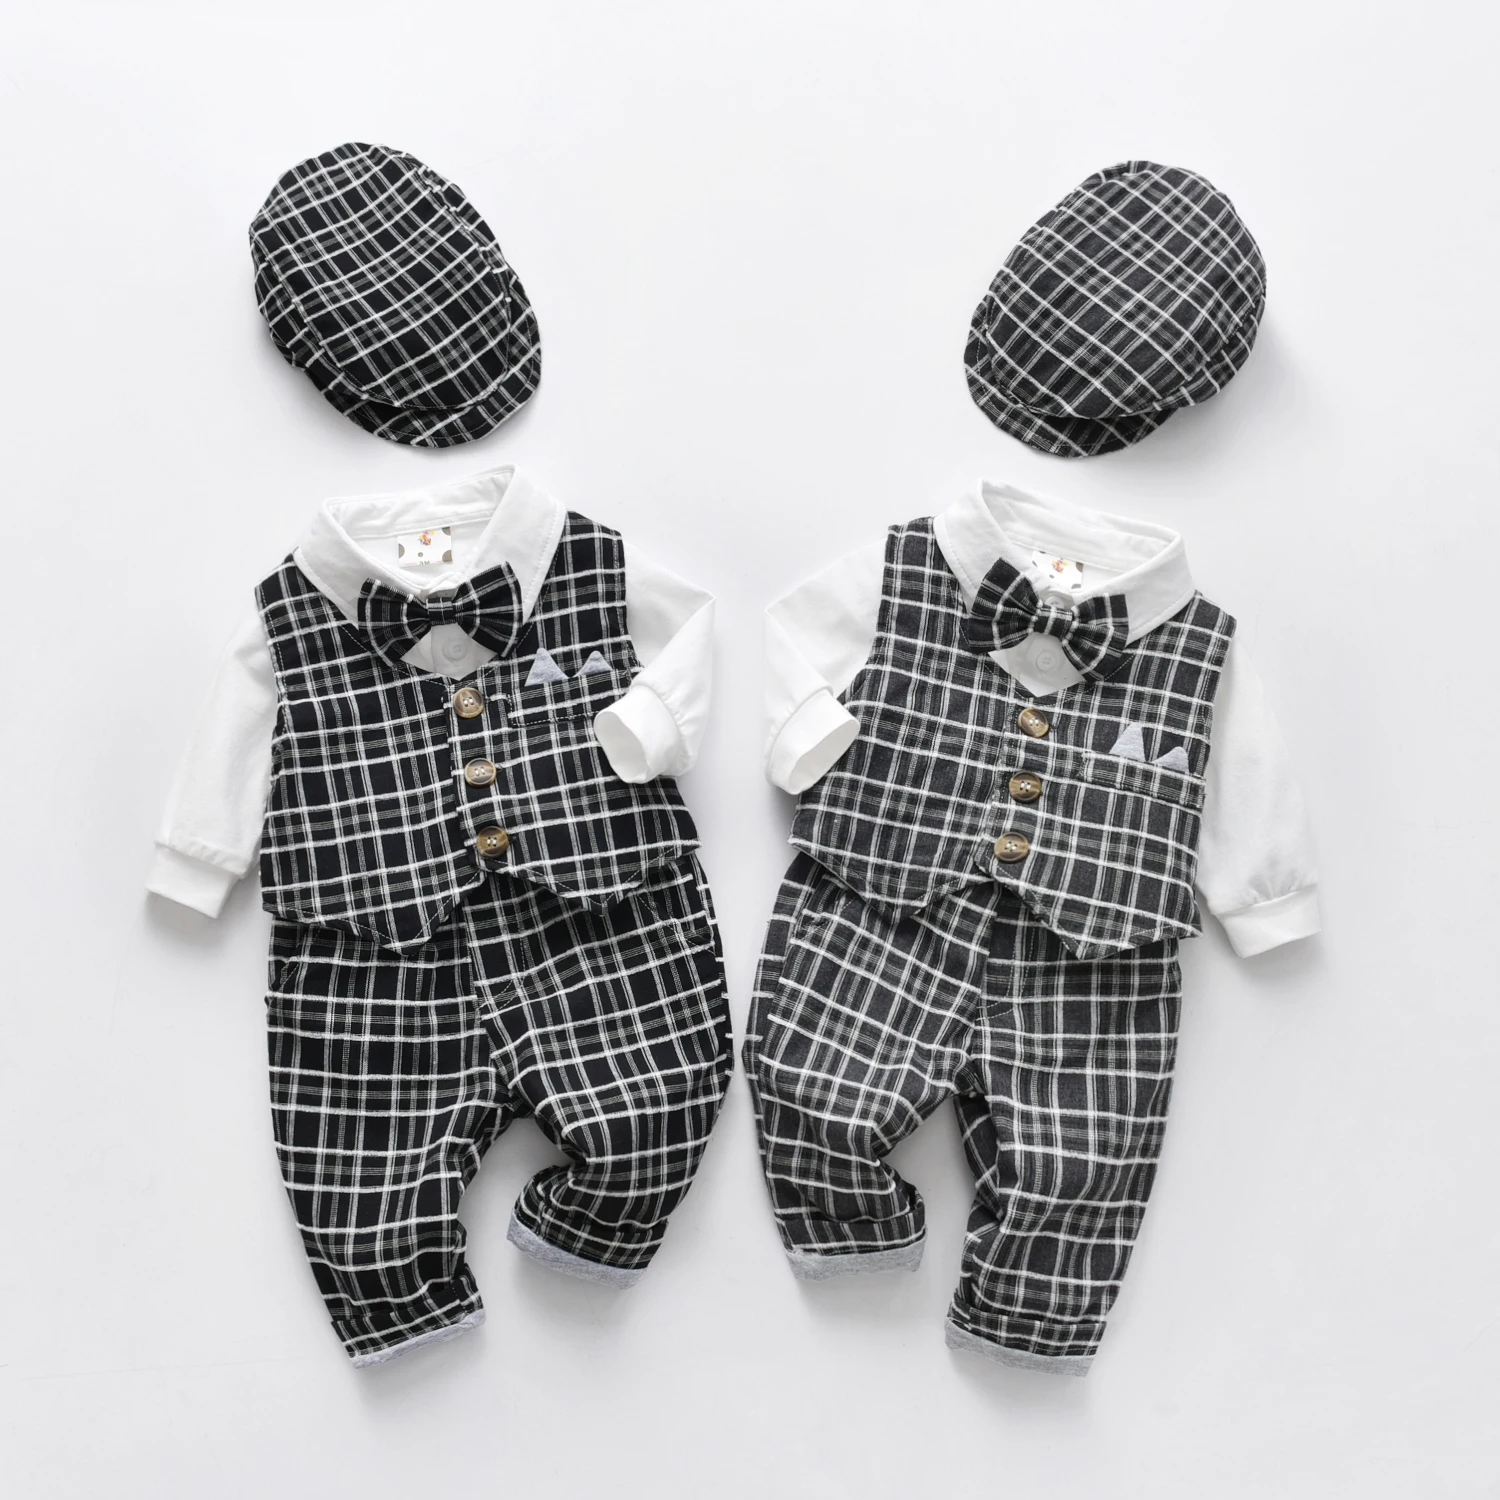 Newborn Boy Formal Clothes Set 4PC Long Sleeves Plaid Bow Neck Style Romper Babypsuit & Blazer Waistcoat & Pants With Hat